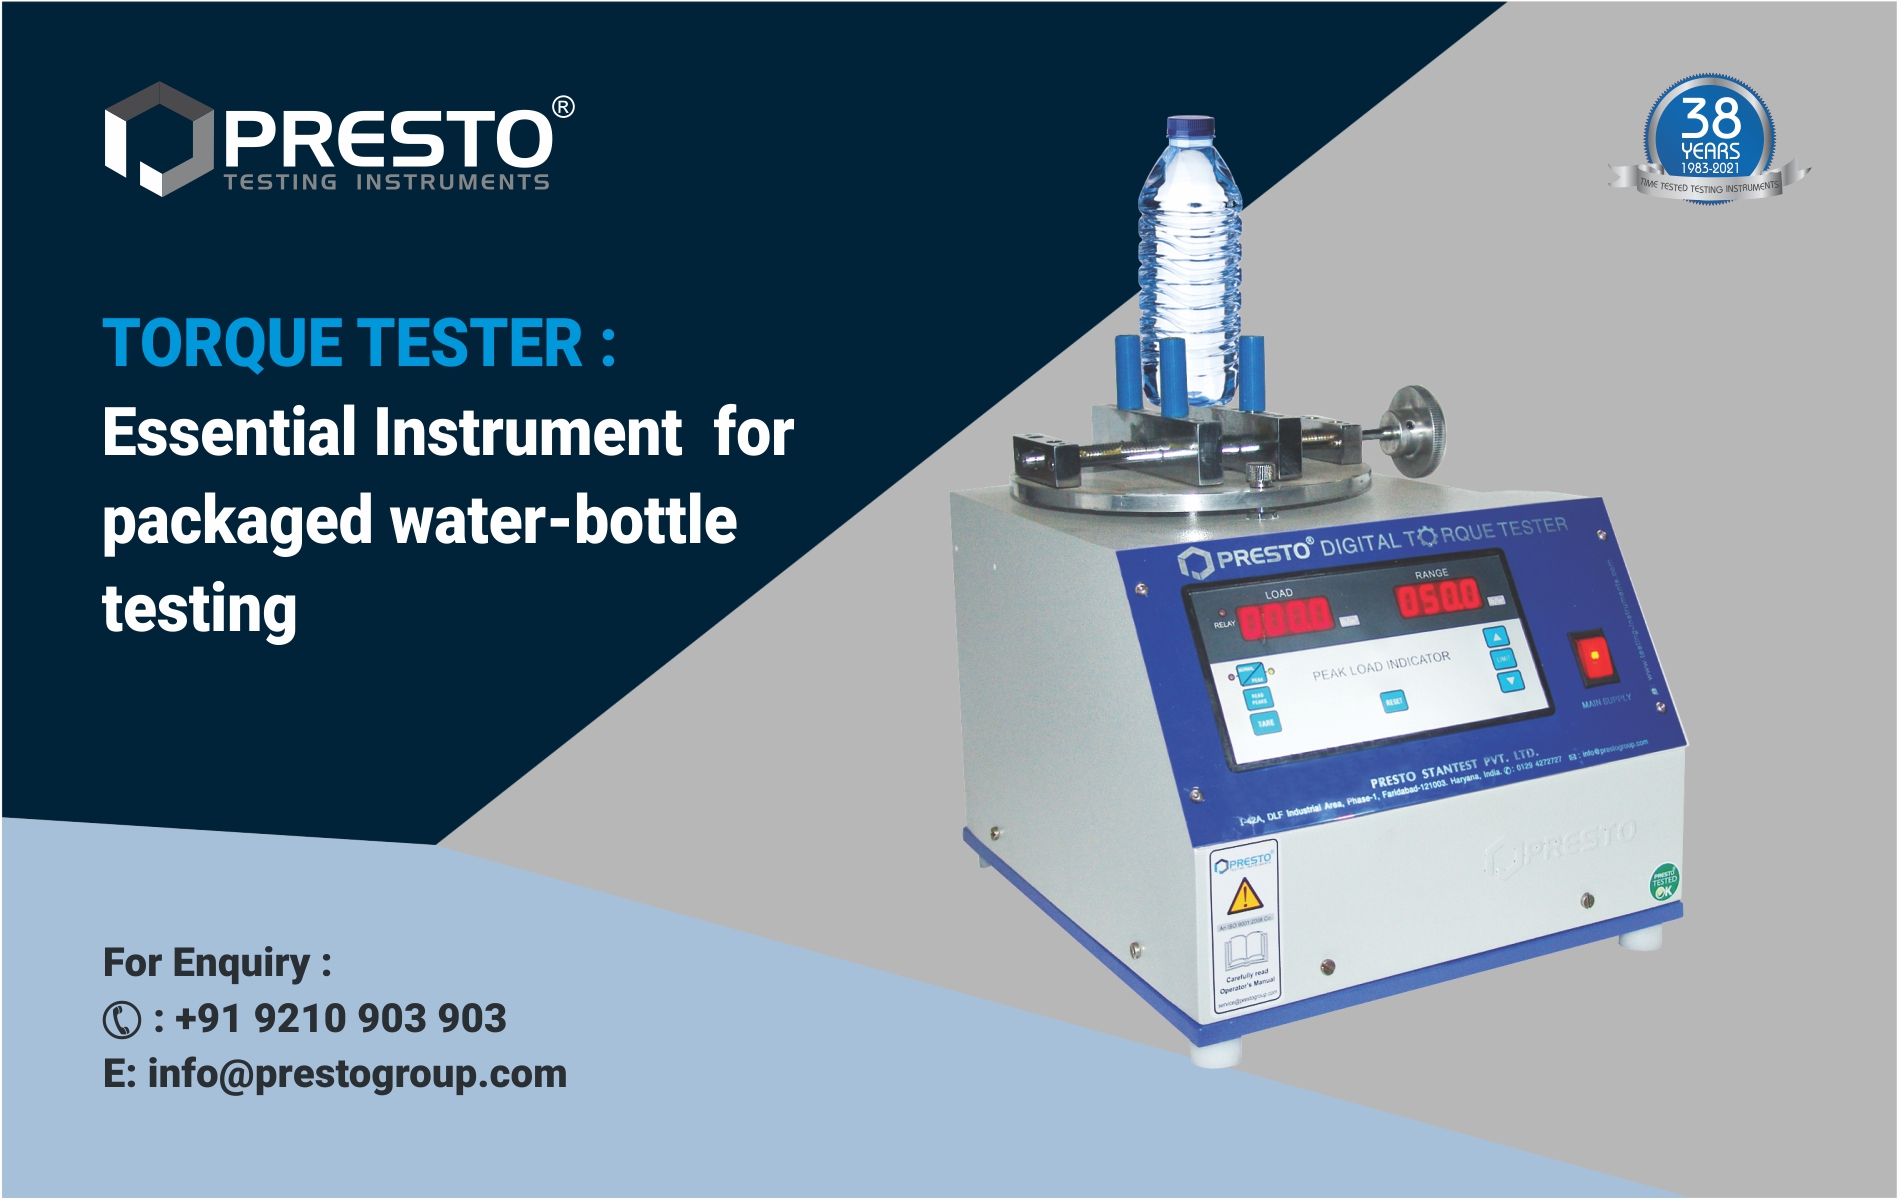 Torque Tester: Essential Instrument for Packaged Water Bottle Testing